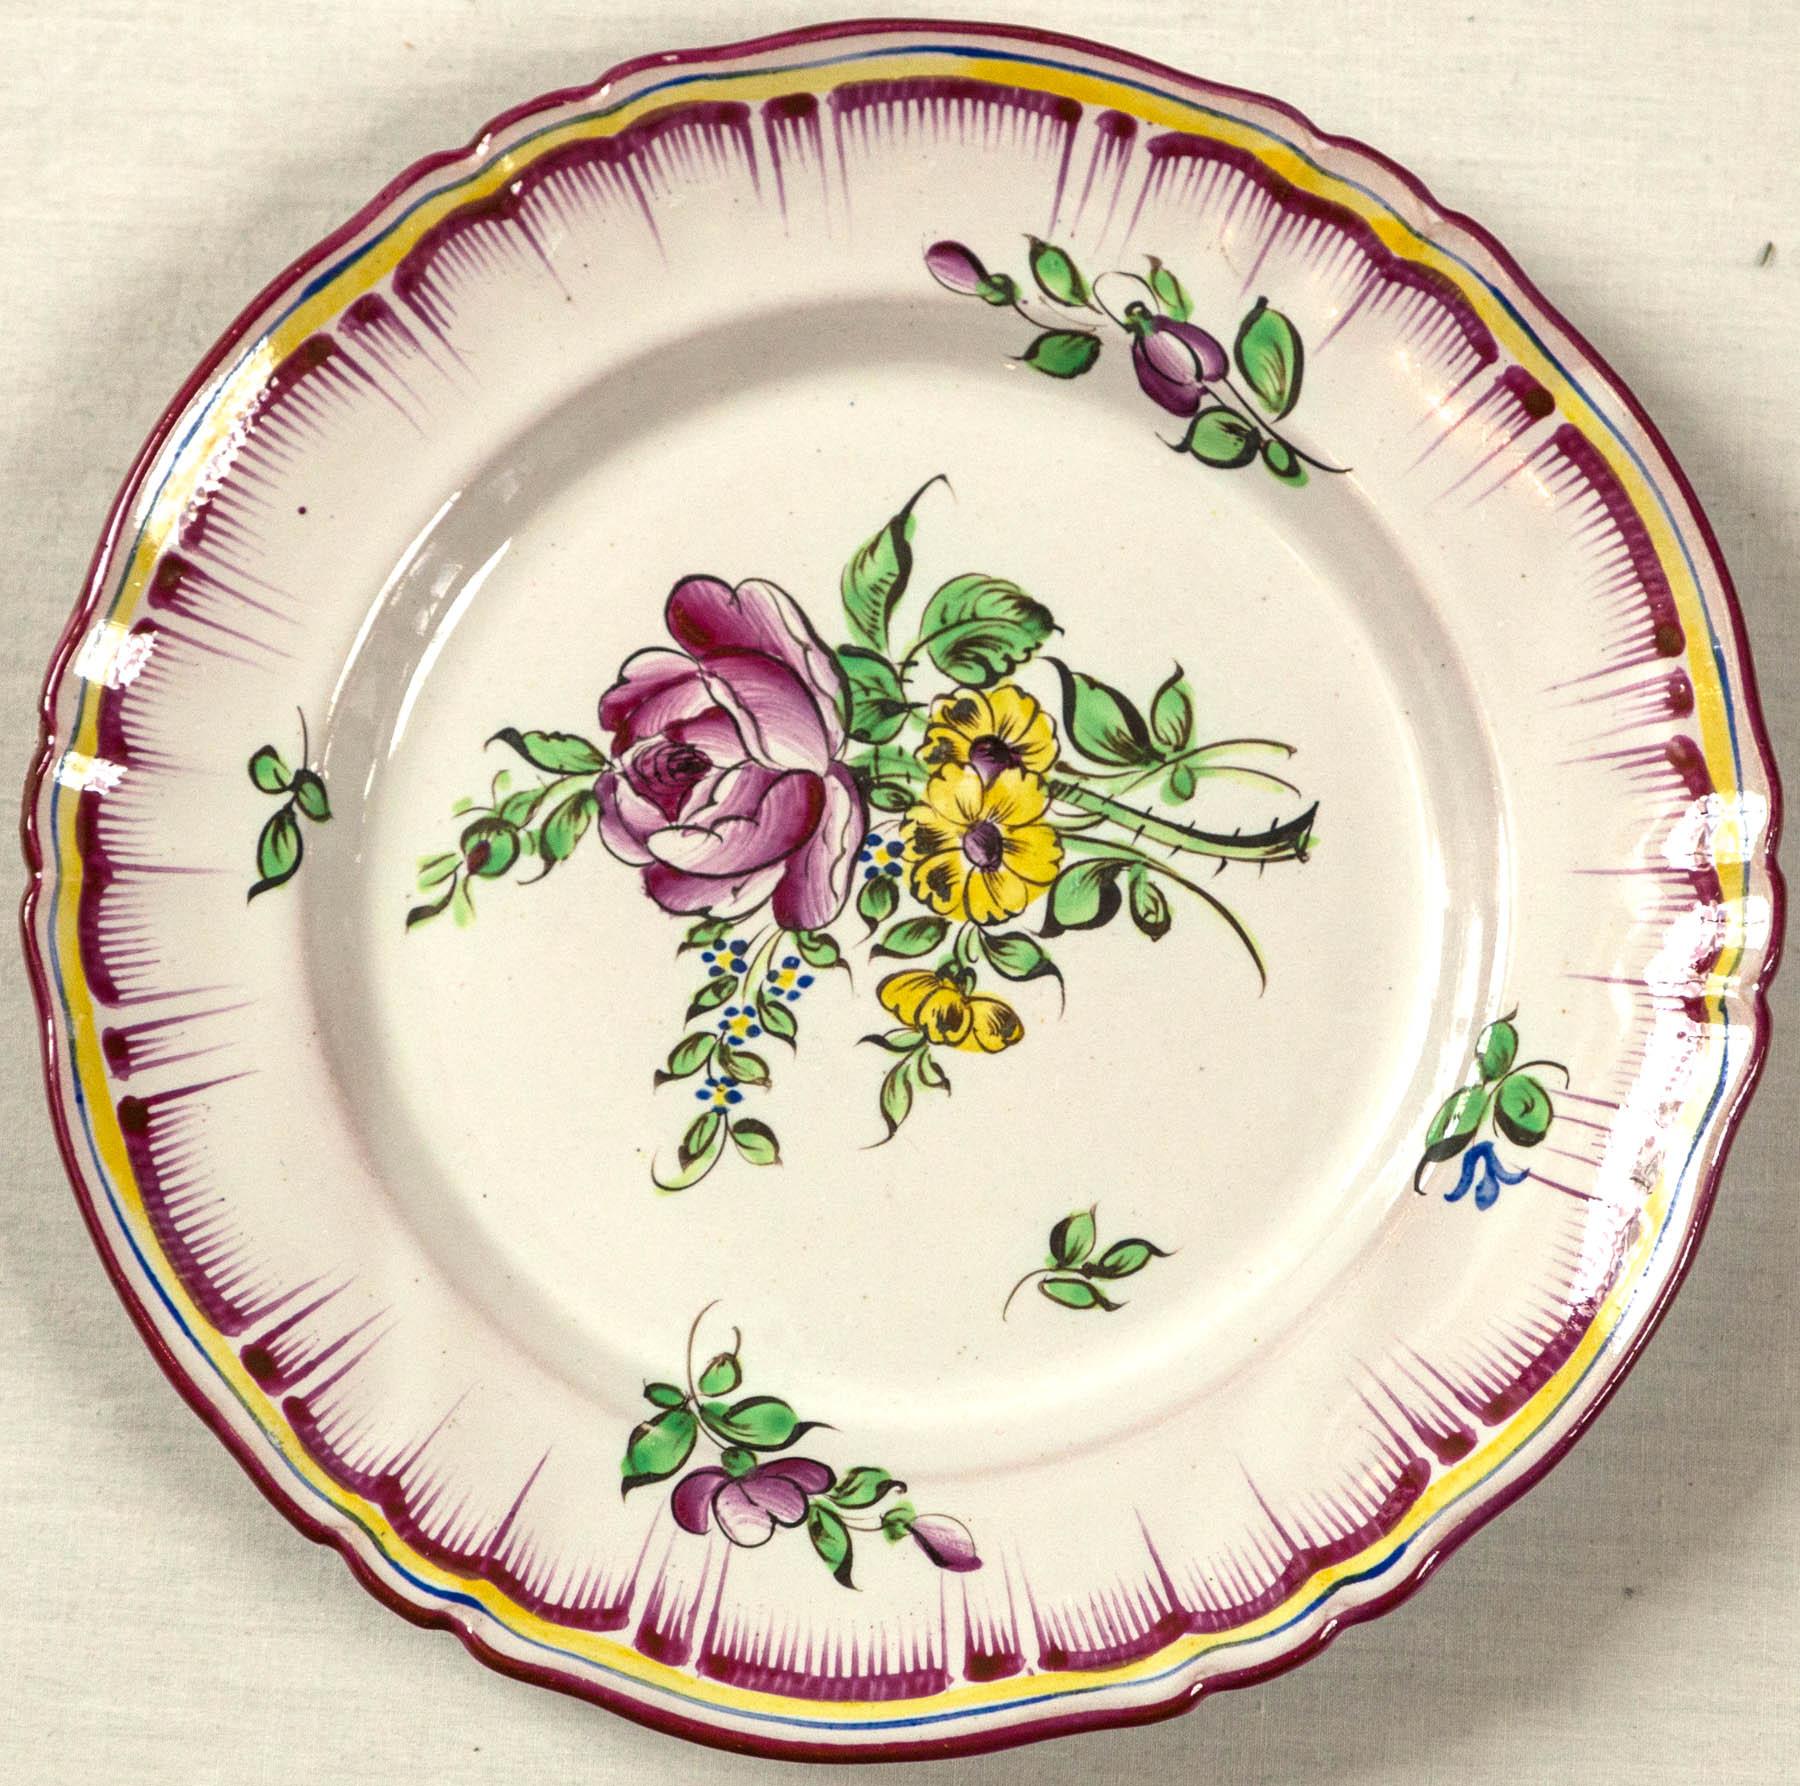 Ceramic Set of 7 French Faience Plates, Late 19th Century